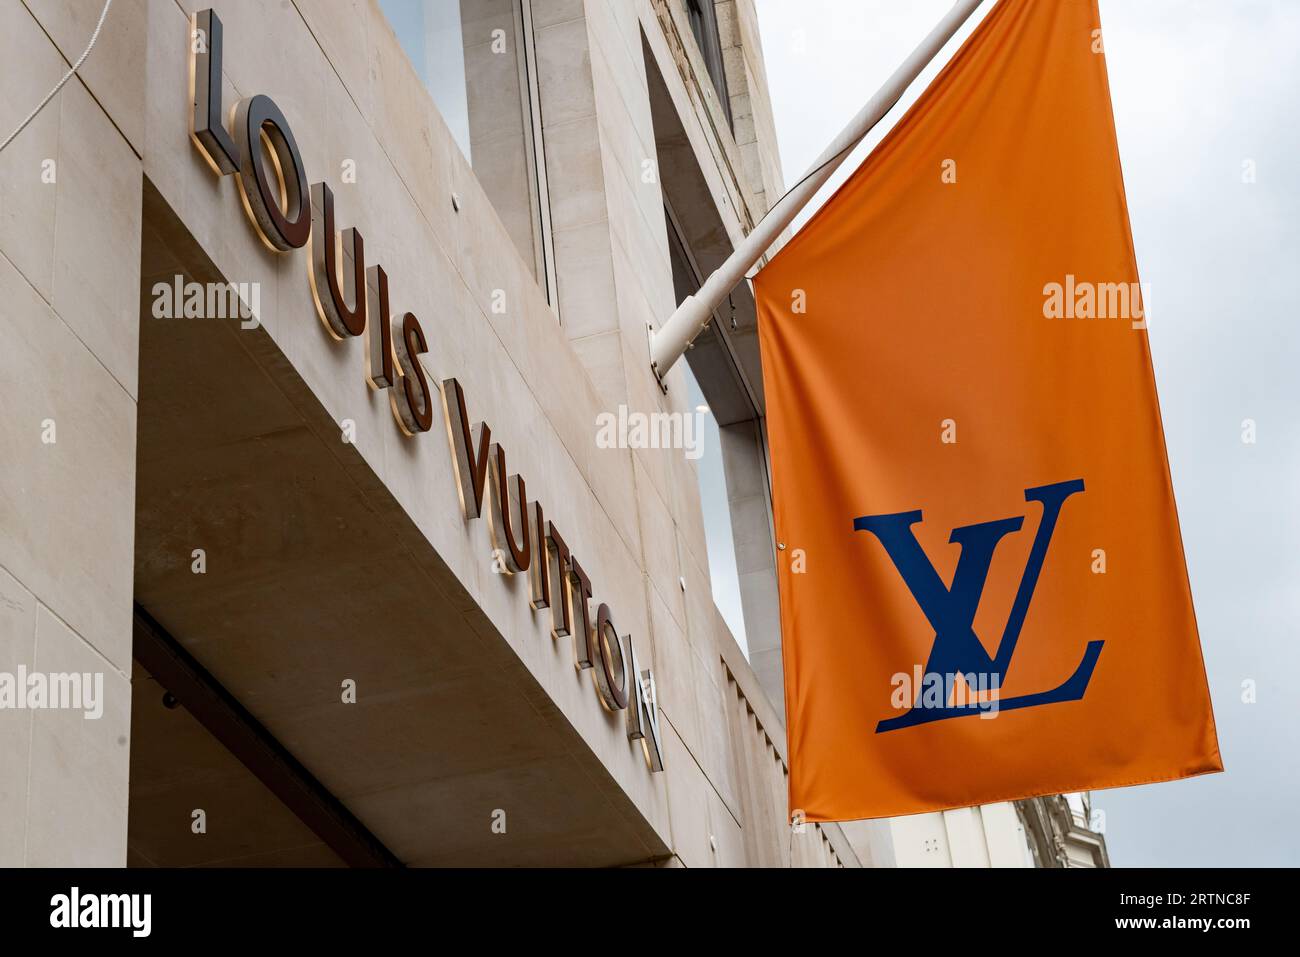 A view of the Louis Vuitton emblem on the store in New Bond Street, London  Stock Photo - Alamy